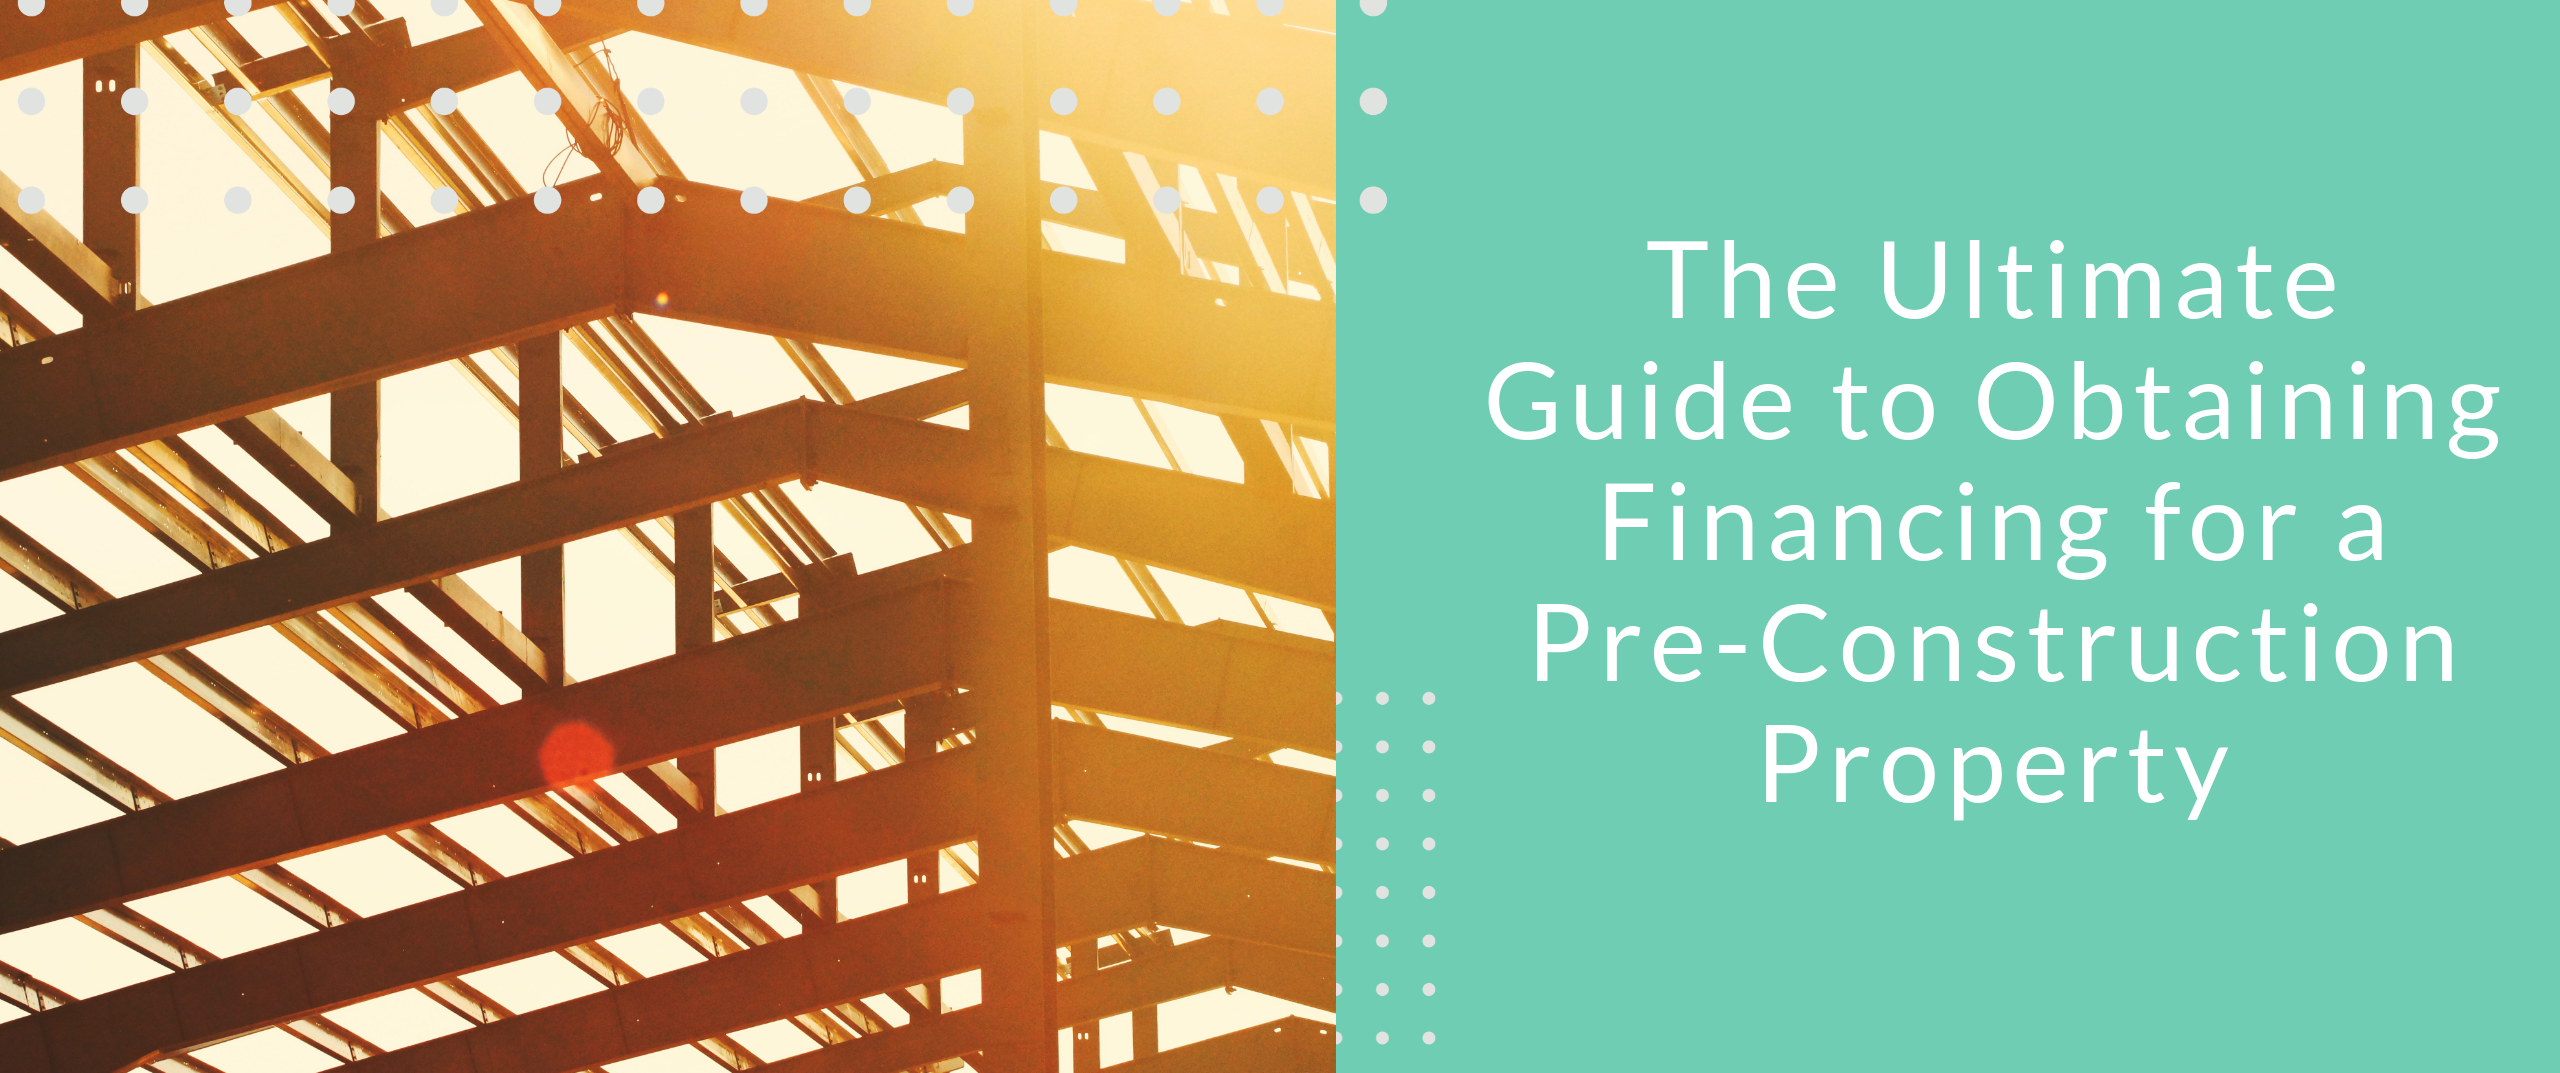 The Ultimate Guide to Obtaining Financing for Pre-Construction Property